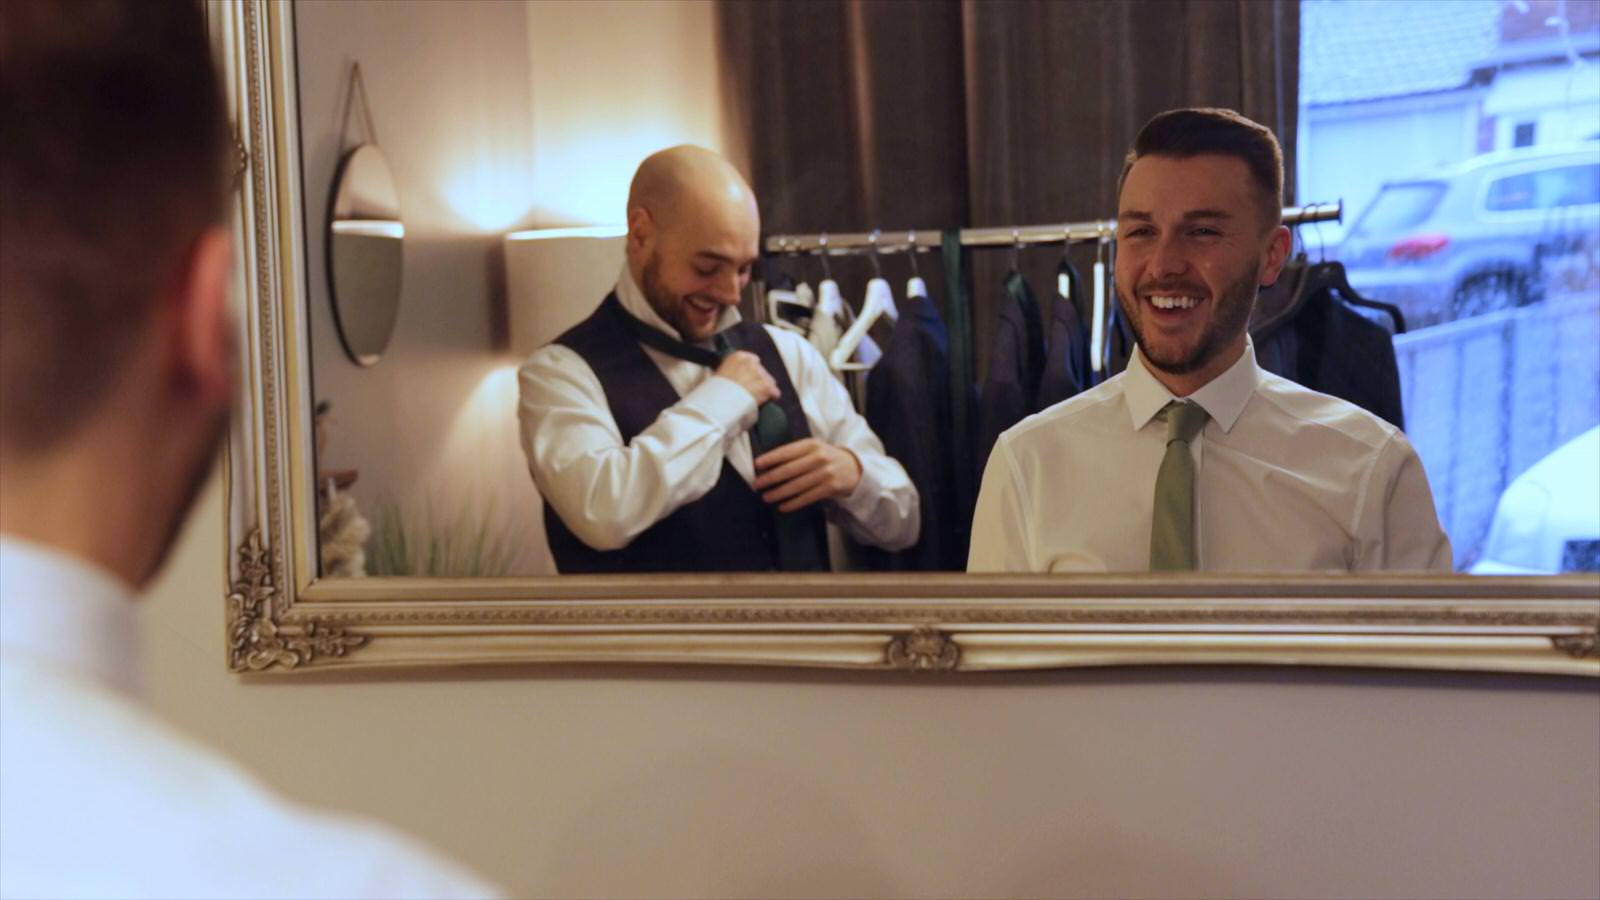 grooms reflection in the mirror laughing